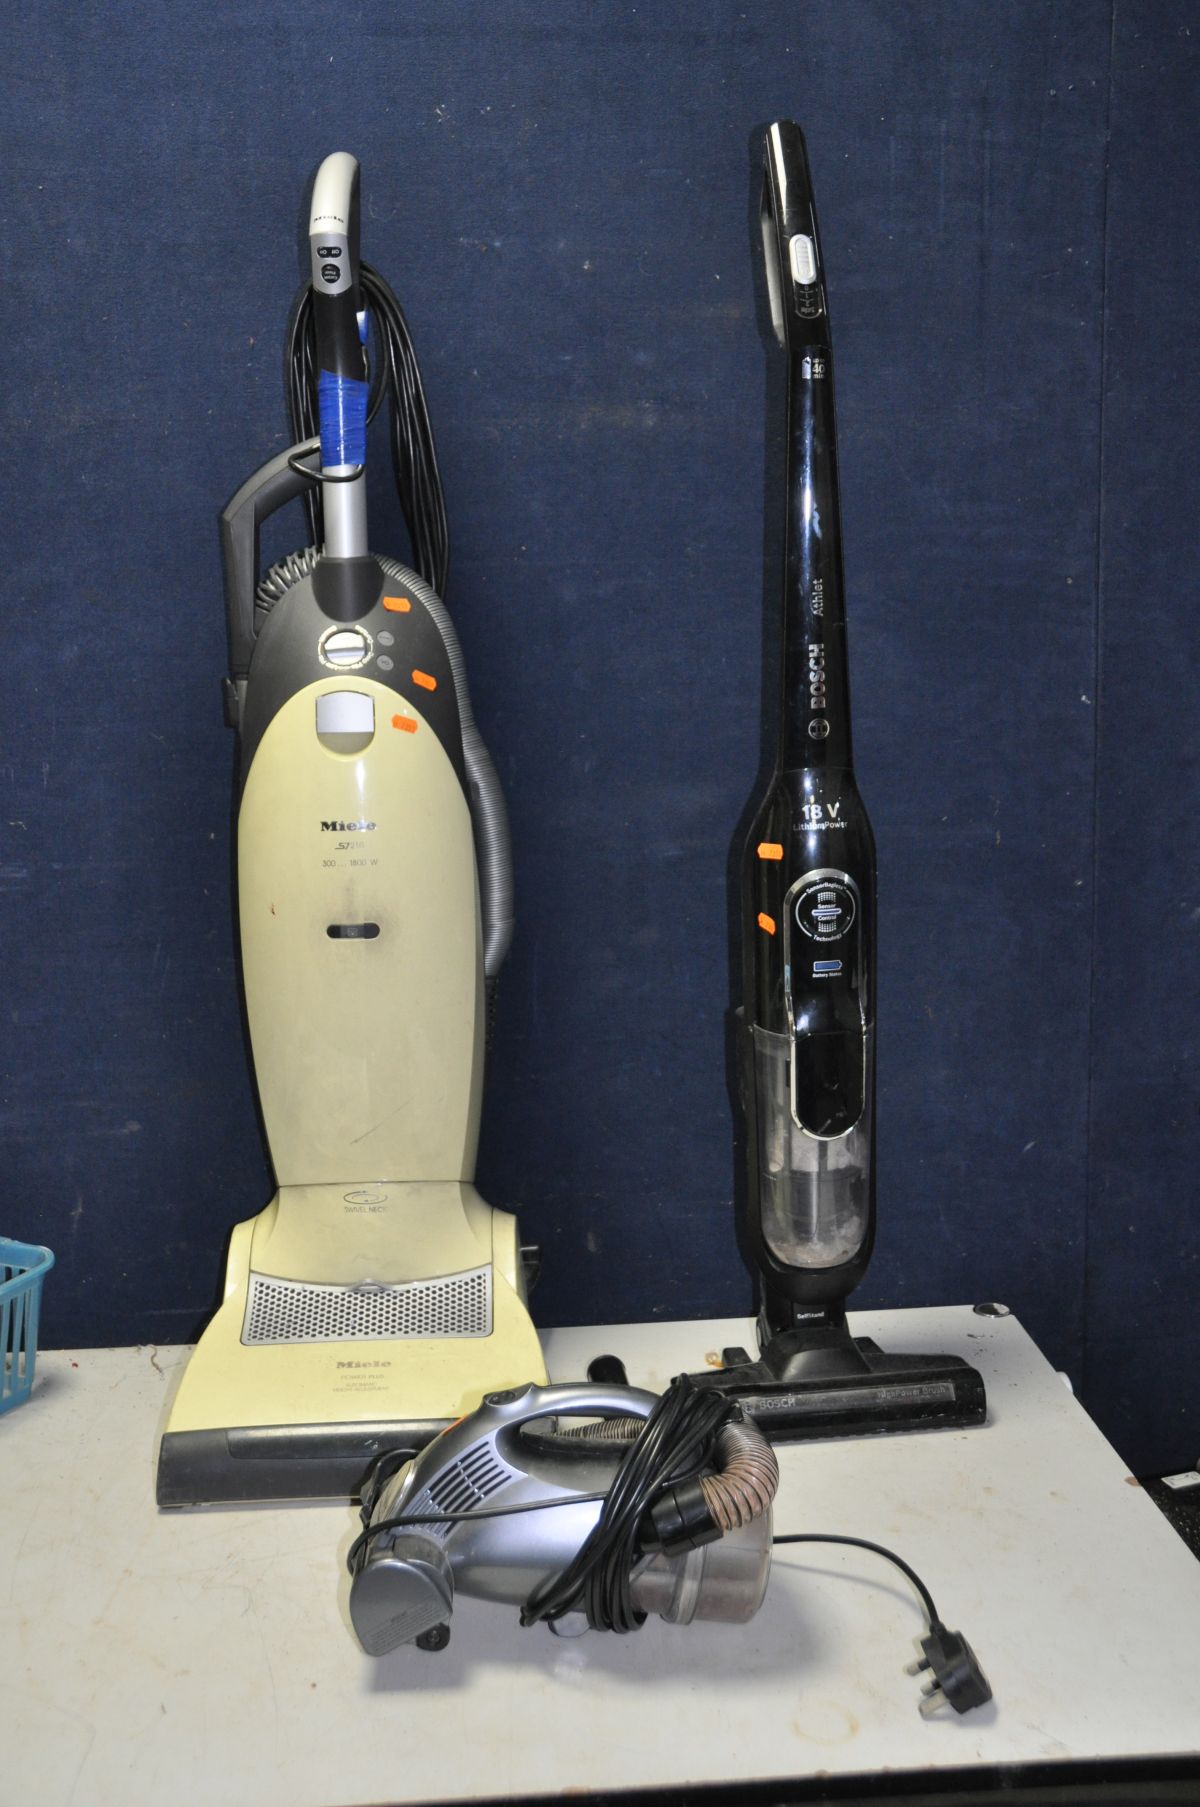 A HOME TEC THE HUNTER HAND HELD VAUUM CLEANER (PAT pass and working) a Miele S7210 Upright Vacuum